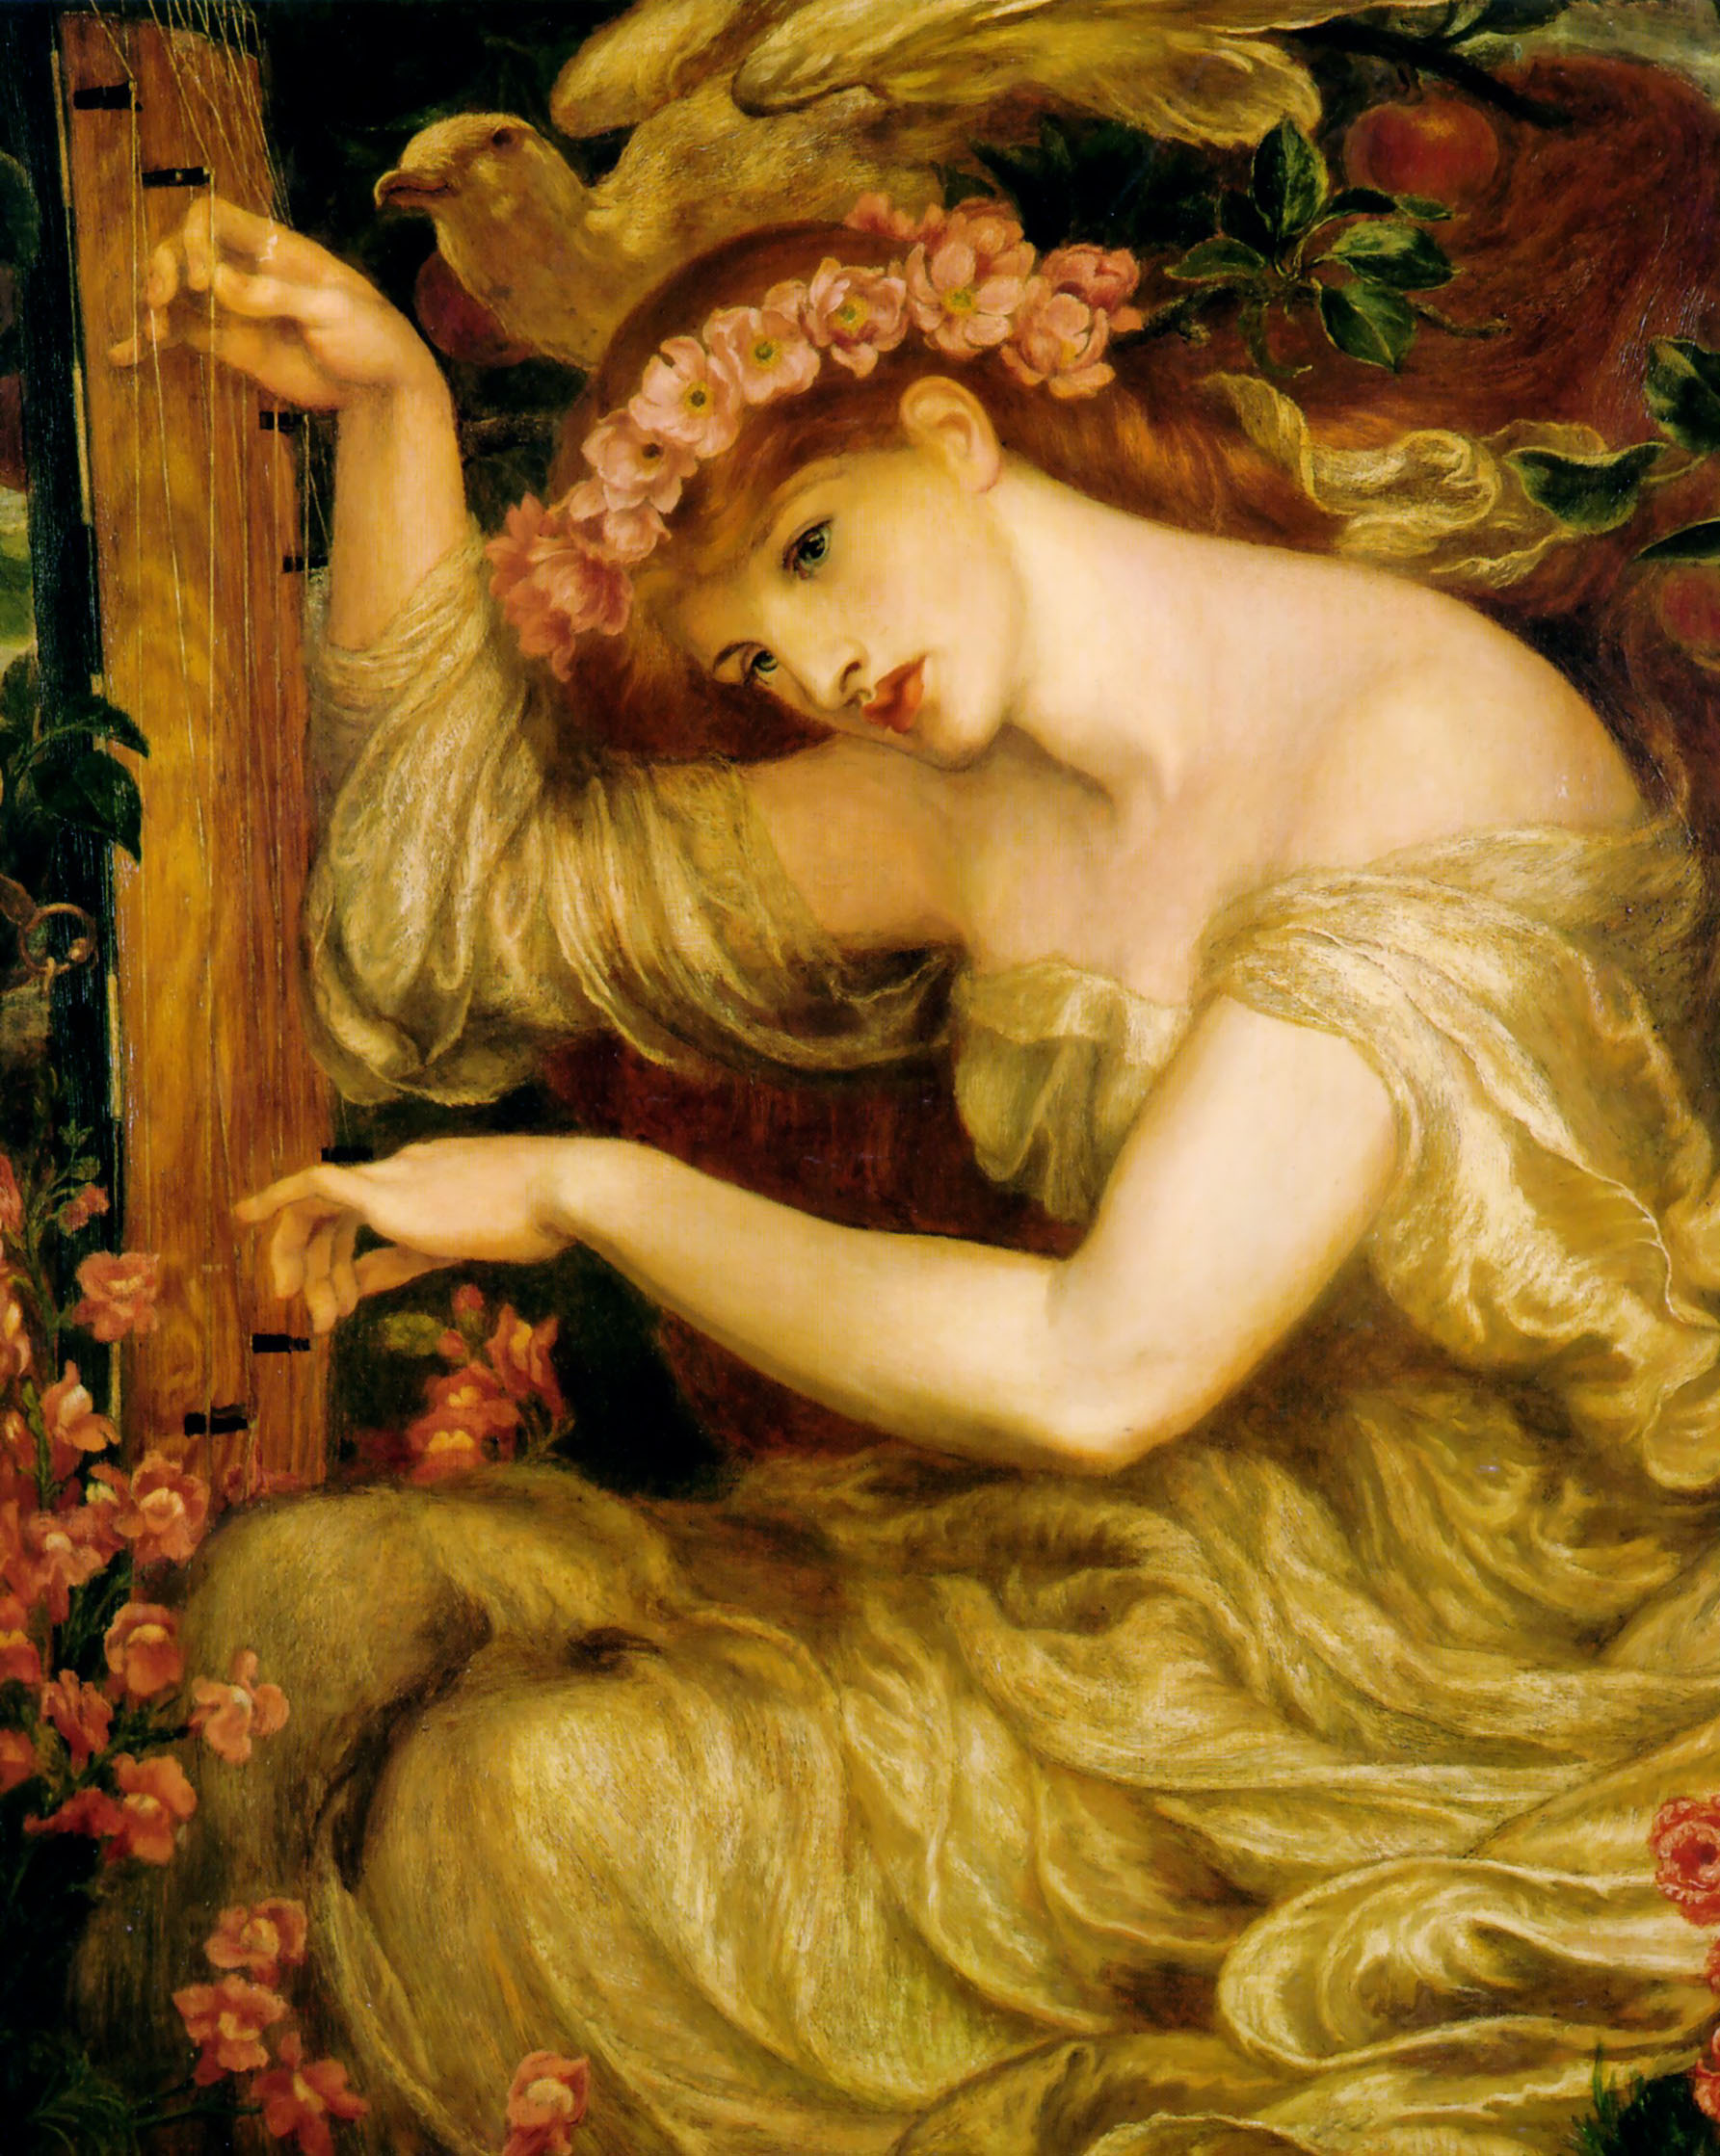 A woman in a flower crown playing an instrument